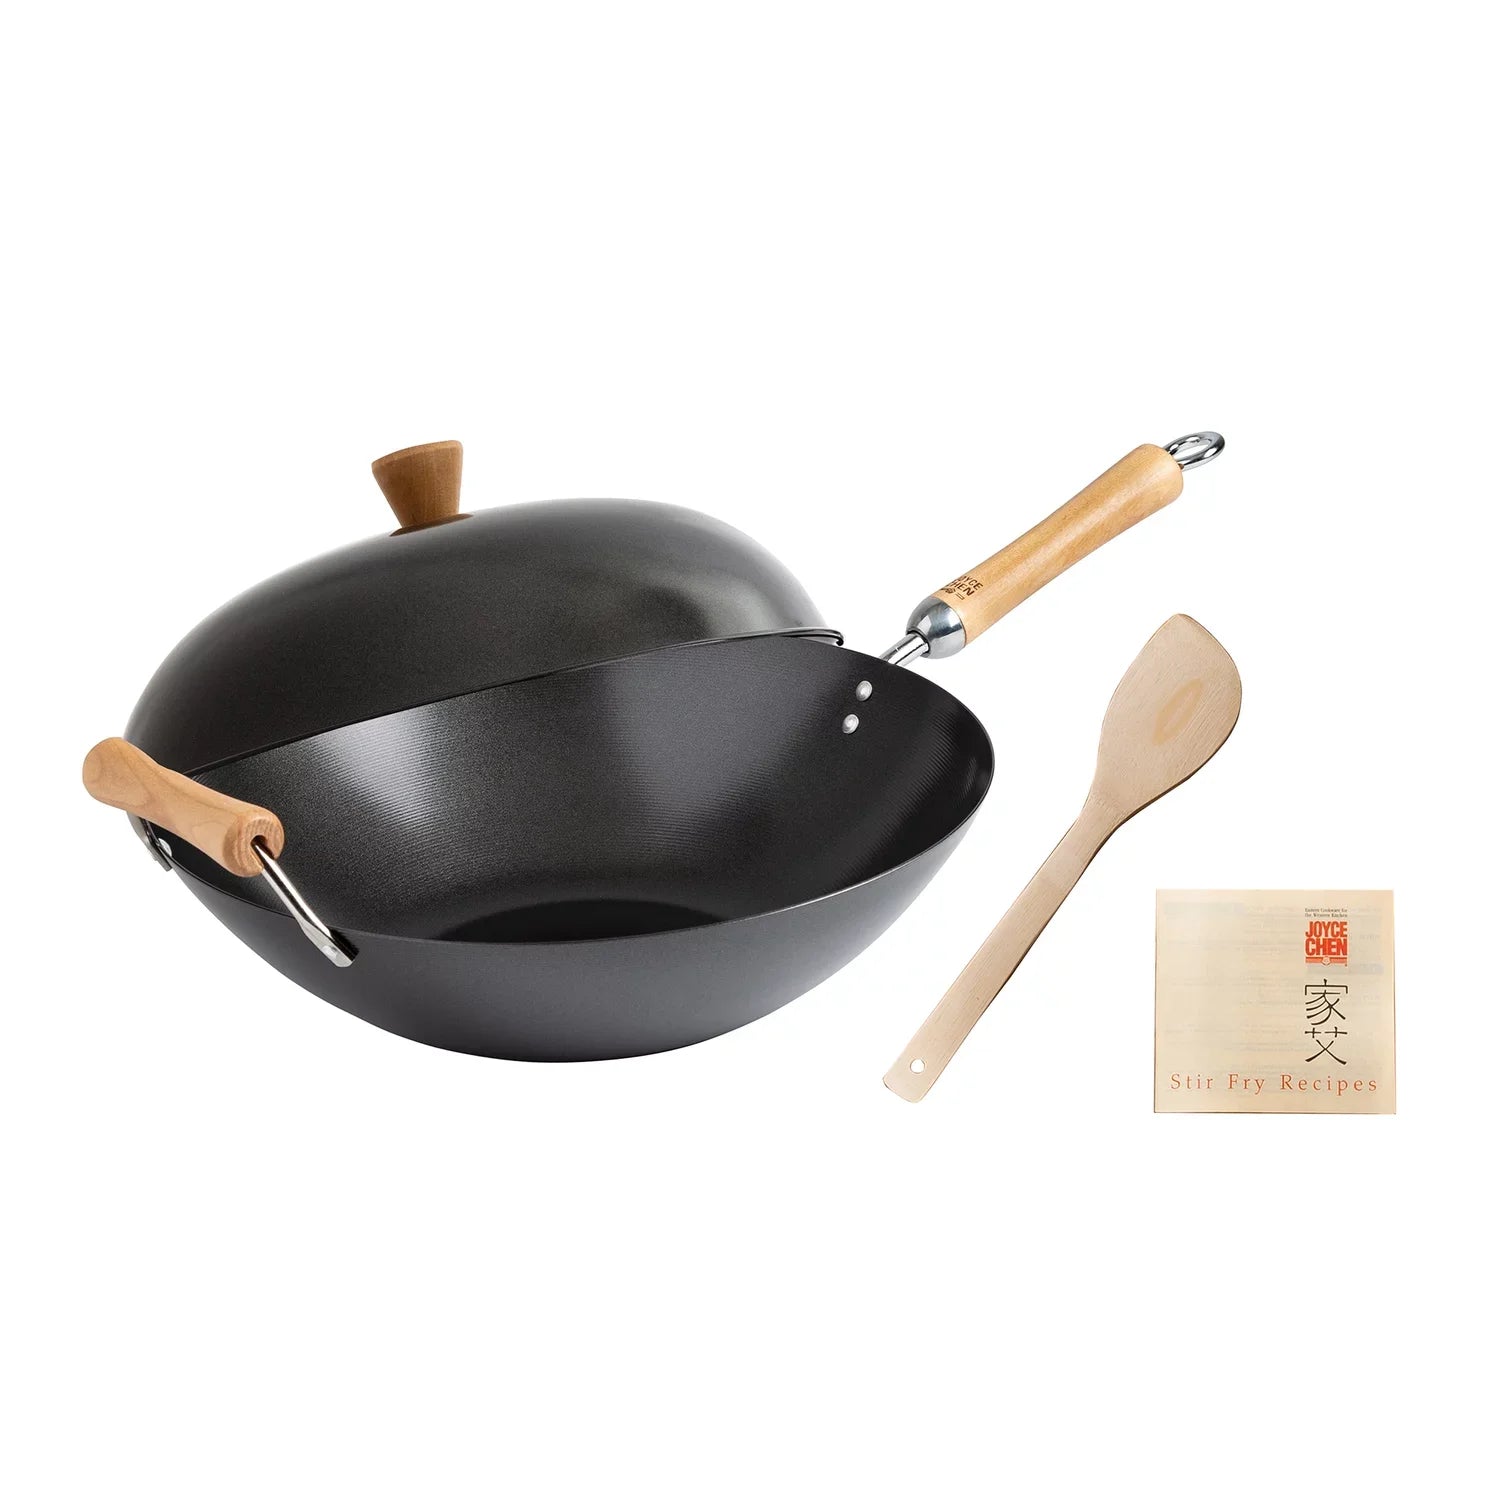 Carbon Steel Nonstick Wok Set with Lid and Birch Handles, Chinese cooking pot 4 Pieces, 14-In. wok